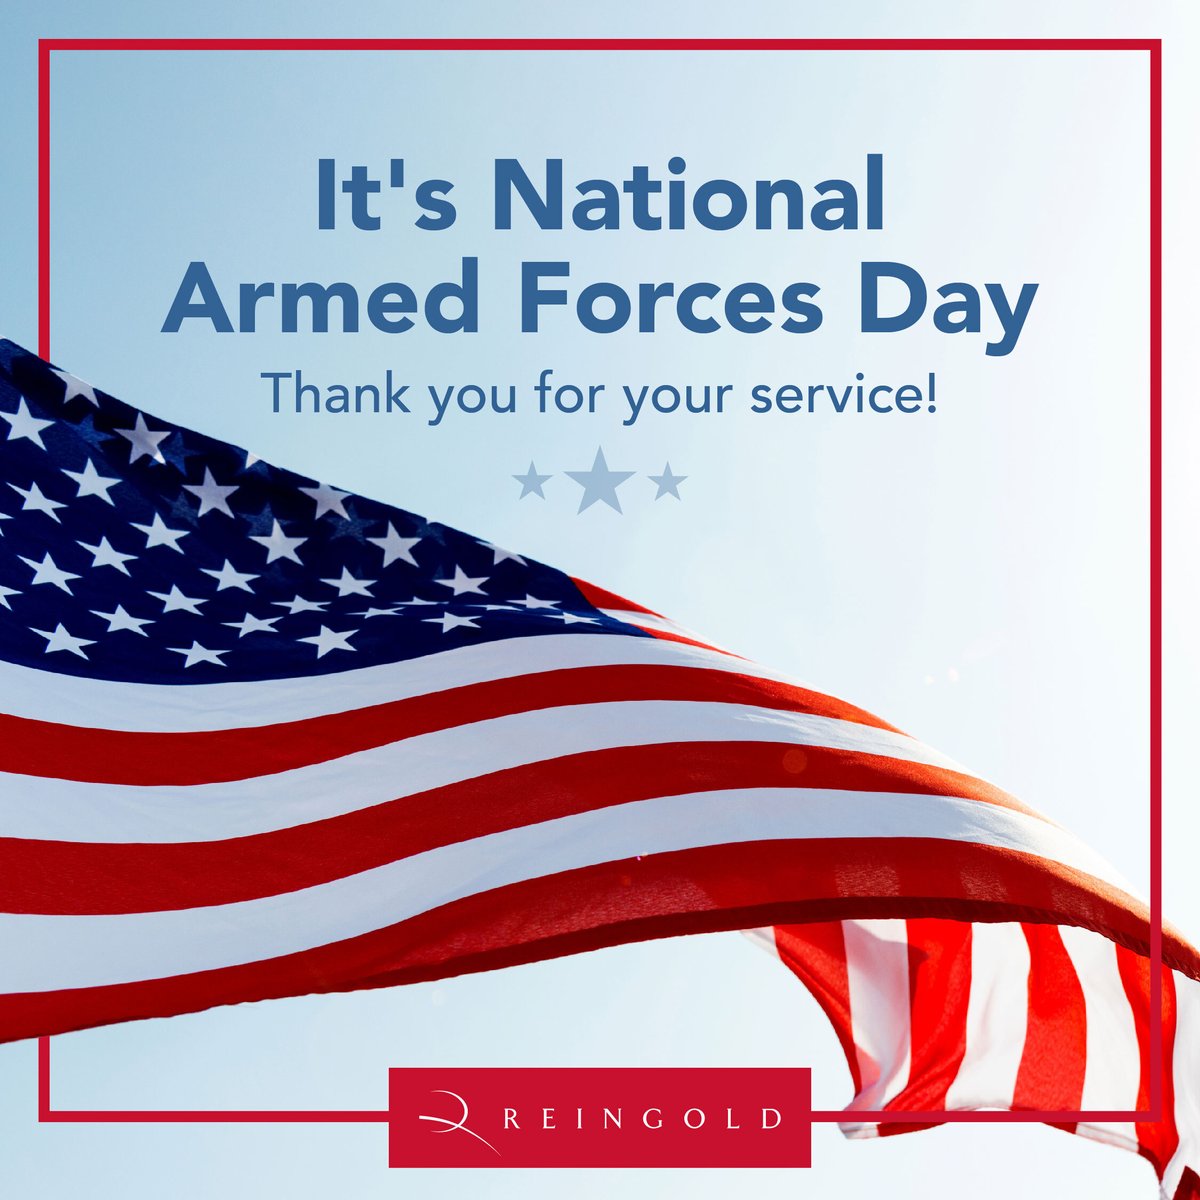 For #ArmedForcesDay, we honor all the brave service members in the U.S. armed forces. We are forever grateful for your immeasurable service and sacrifices for our country!